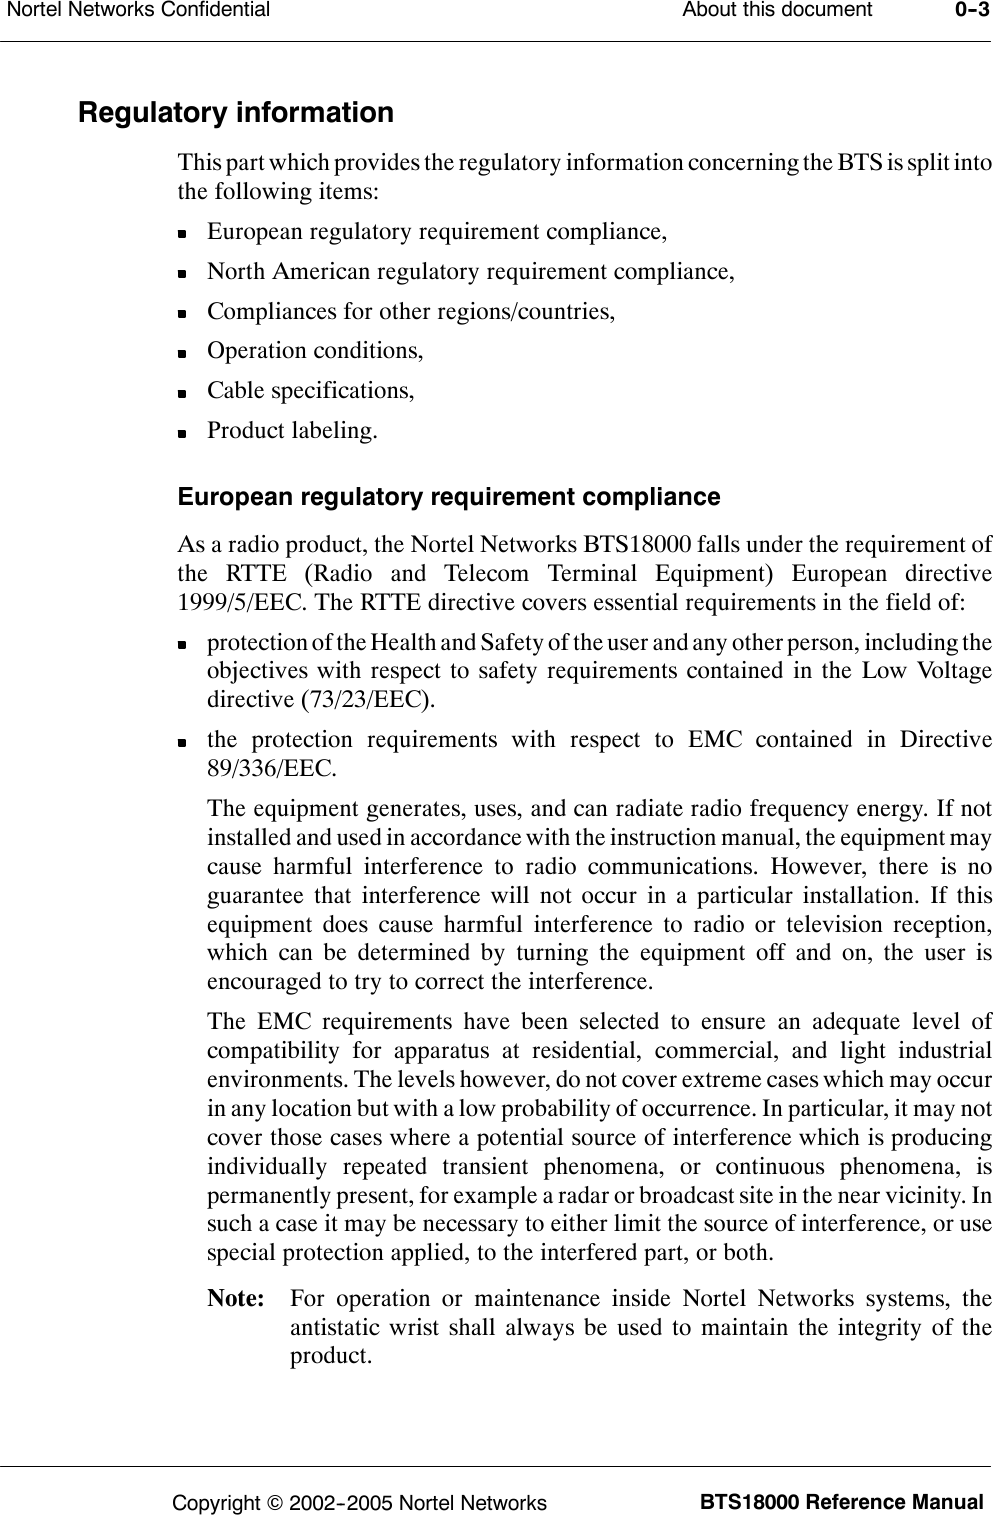 About this documentNortel Networks Confidential 0--3BTS18000 Reference ManualCopyright ©2002--2005 Nortel NetworksRegulatory informationThis part which provides the regulatory information concerning the BTS is split intothe following items:European regulatory requirement compliance,North American regulatory requirement compliance,Compliances for other regions/countries,Operation conditions,Cable specifications,Product labeling.European regulatory requirement complianceAs a radio product, the Nortel Networks BTS18000 falls under the requirement ofthe RTTE (Radio and Telecom Terminal Equipment) European directive1999/5/EEC. The RTTE directive covers essential requirements in the field of:protection of the Health and Safety of the user and any other person, including theobjectives with respect to safety requirements contained in the Low Voltagedirective (73/23/EEC).the protection requirements with respect to EMC contained in Directive89/336/EEC.The equipment generates, uses, and can radiate radio frequency energy. If notinstalled and used in accordance with the instruction manual, the equipment maycause harmful interference to radio communications. However, there is noguarantee that interference will not occur in a particular installation. If thisequipment does cause harmful interference to radio or television reception,which can be determined by turning the equipment off and on, the user isencouraged to try to correct the interference.The EMC requirements have been selected to ensure an adequate level ofcompatibility for apparatus at residential, commercial, and light industrialenvironments. The levels however, do not cover extreme cases which may occurin any location but with a low probability of occurrence. In particular, it may notcover those cases where a potential source of interference which is producingindividually repeated transient phenomena, or continuous phenomena, ispermanently present, for example a radar or broadcast site in the near vicinity. Insuch a case it may be necessary to either limit the source of interference, or usespecial protection applied, to the interfered part, or both.Note: For operation or maintenance inside Nortel Networks systems, theantistatic wrist shall always be used to maintain the integrity of theproduct.